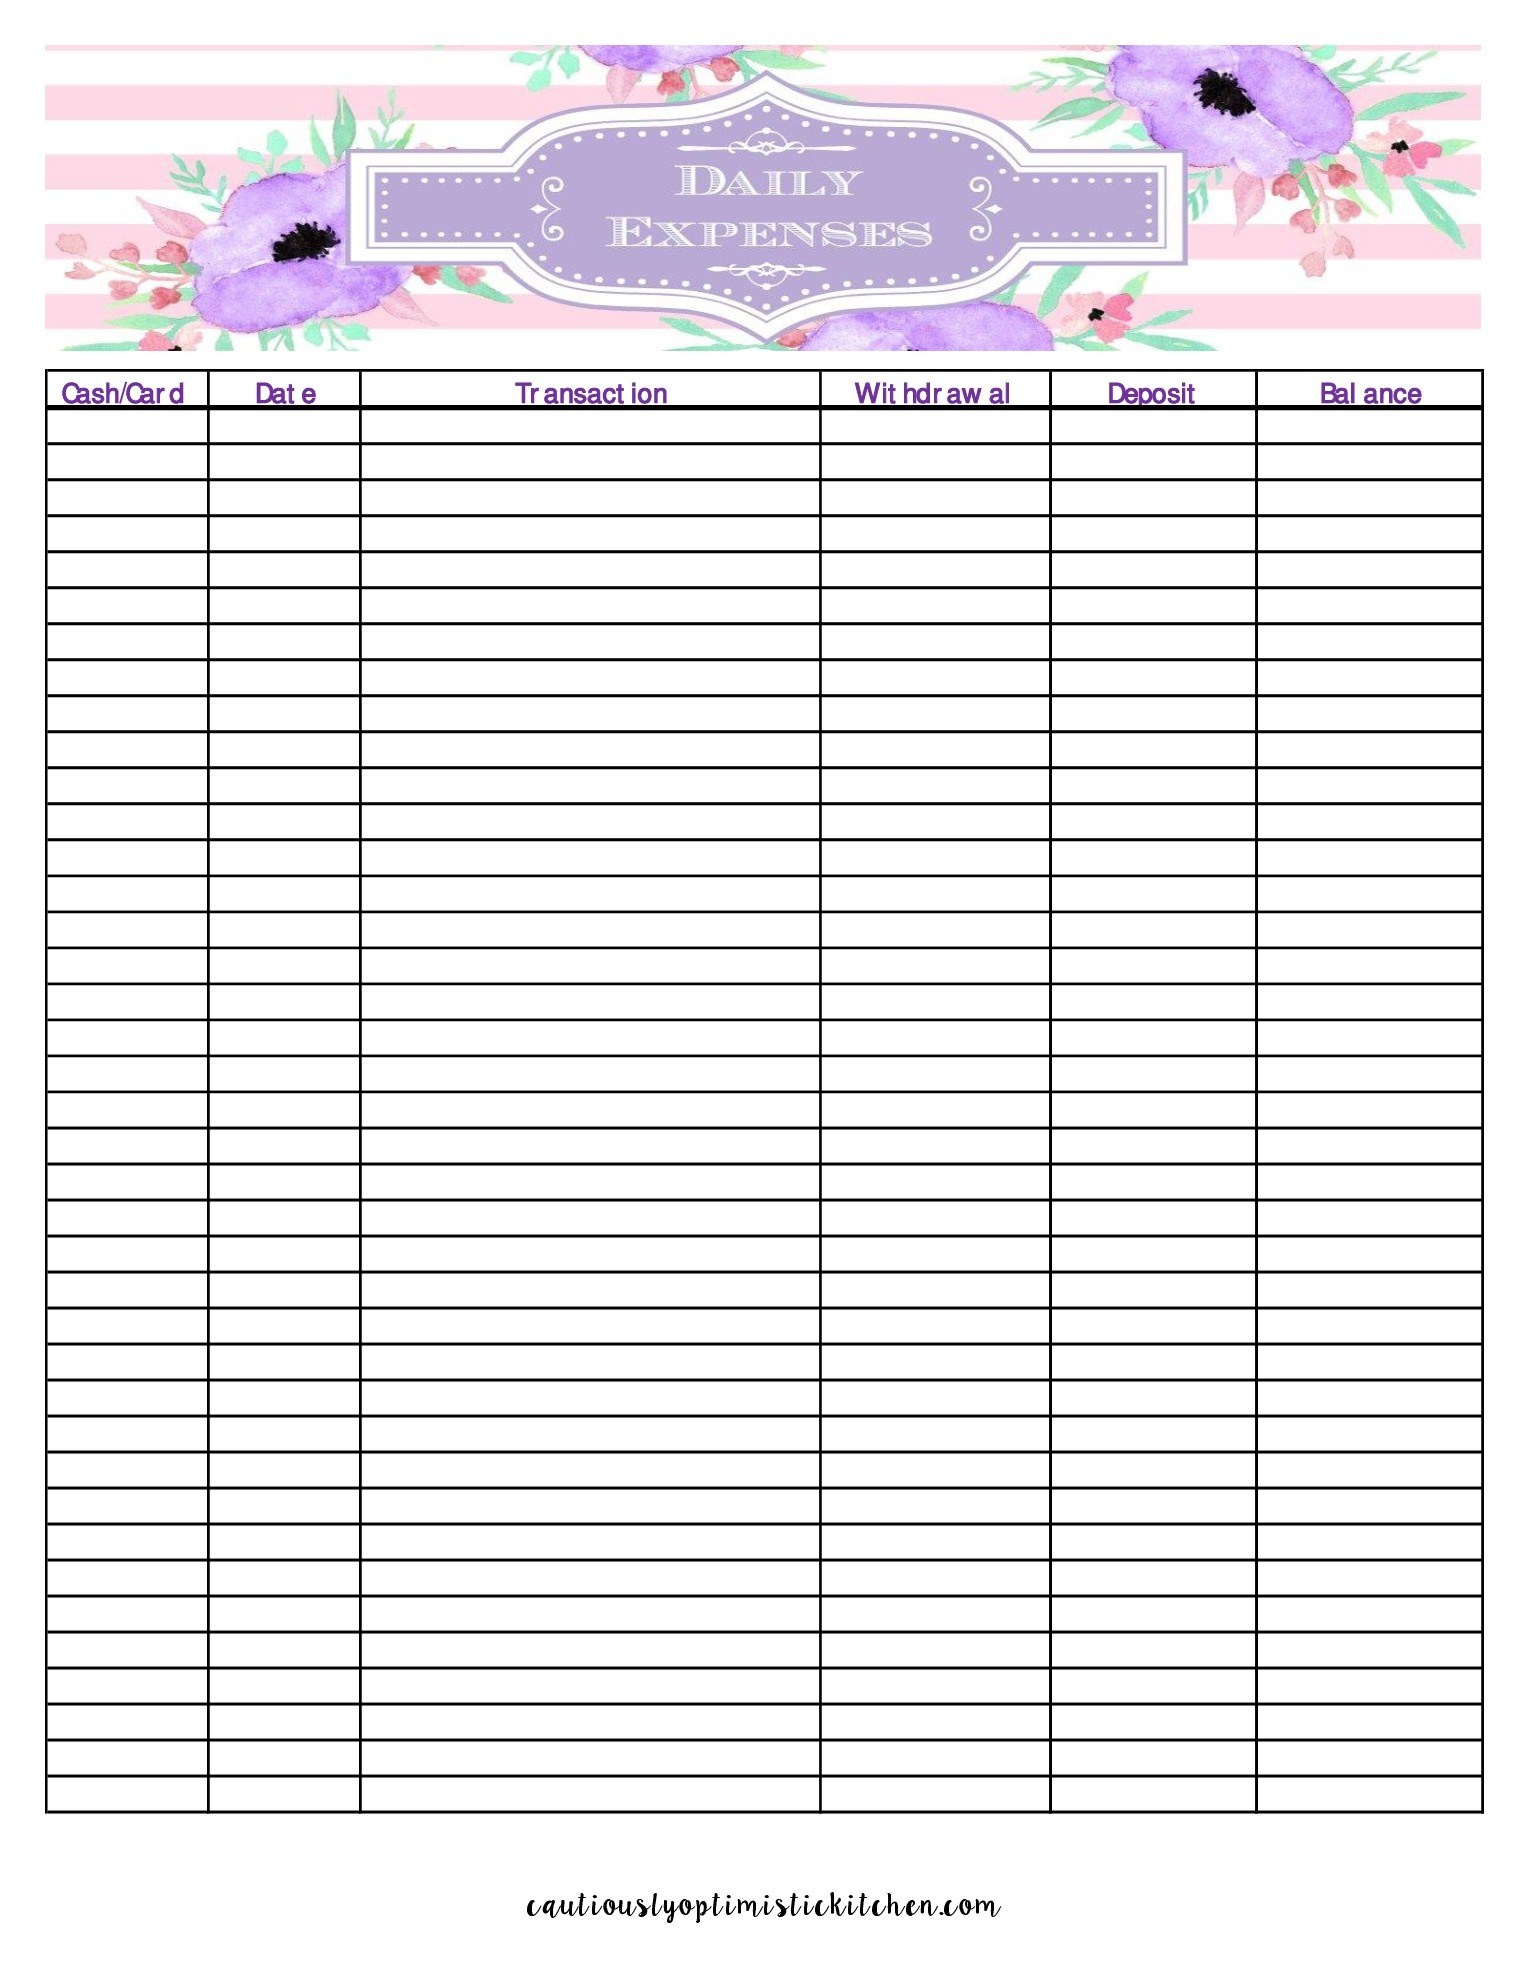 Daily Expense Tracker - Cautiously Optimistic Kitchen - Free Printable Daily Expense Tracker